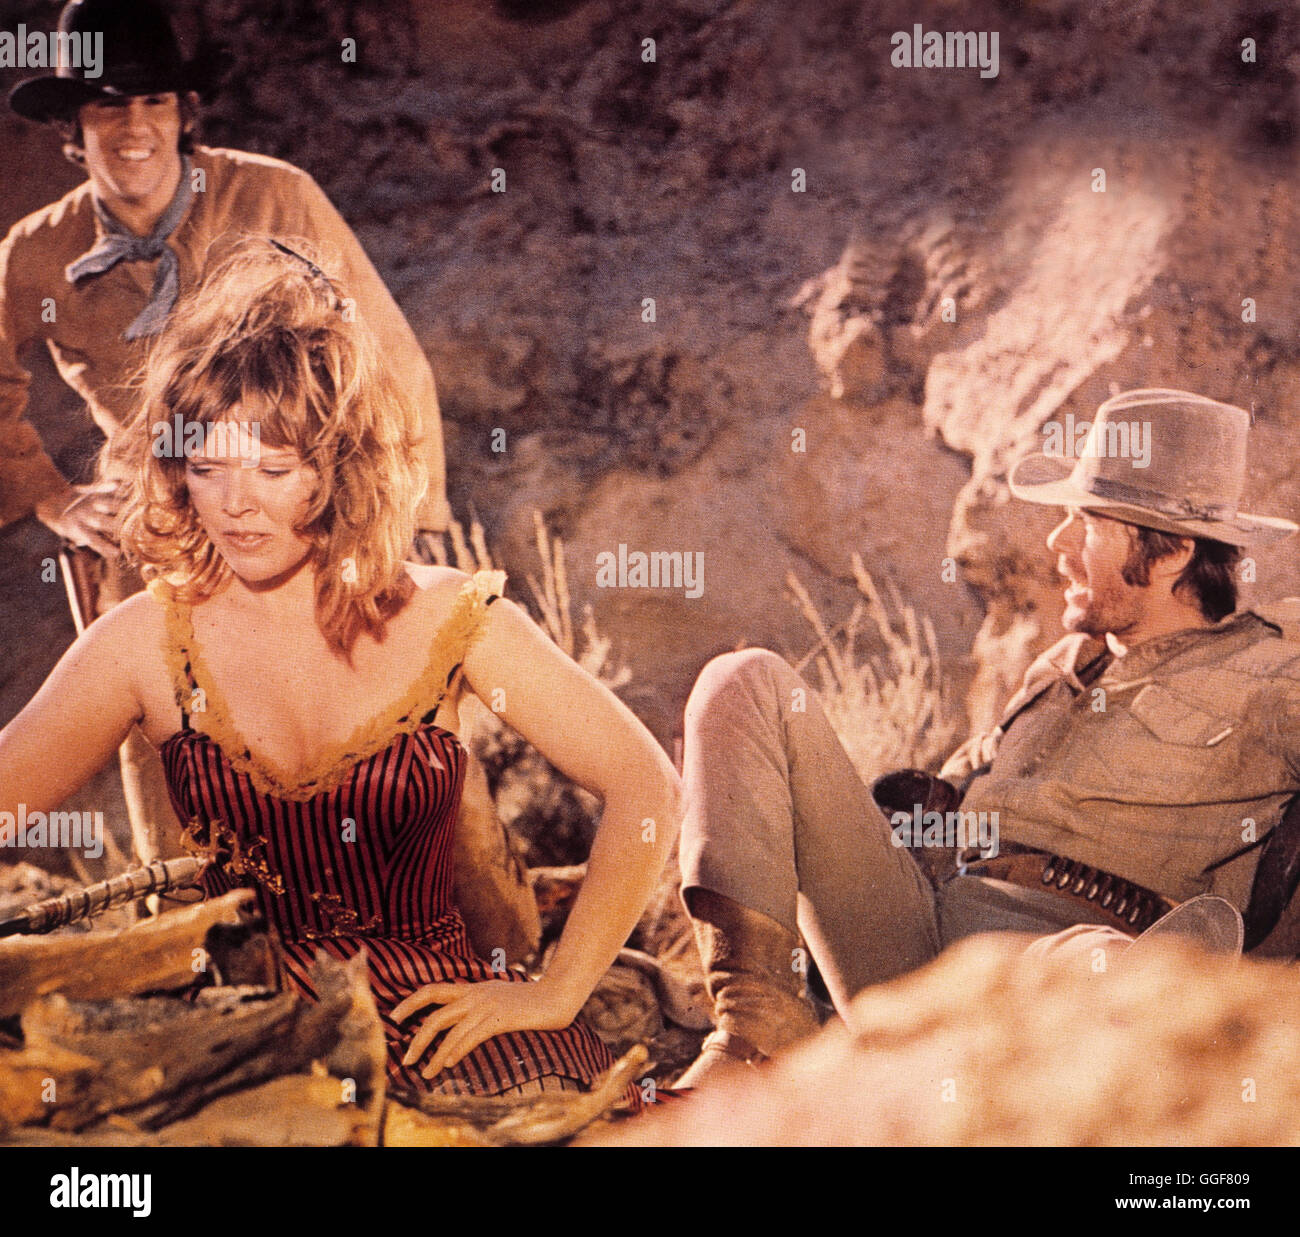 SHOOT OUT - ABRECHNUNG IN GUN HILL / Shoot Out USA 1971 / Henry Hathaway JEFF COREY (Soldat), SUSAN TYRELL (Alma), Robert (Bobby Jay) Regie: Henry Hathaway Alias. Shoot Out Stockfoto